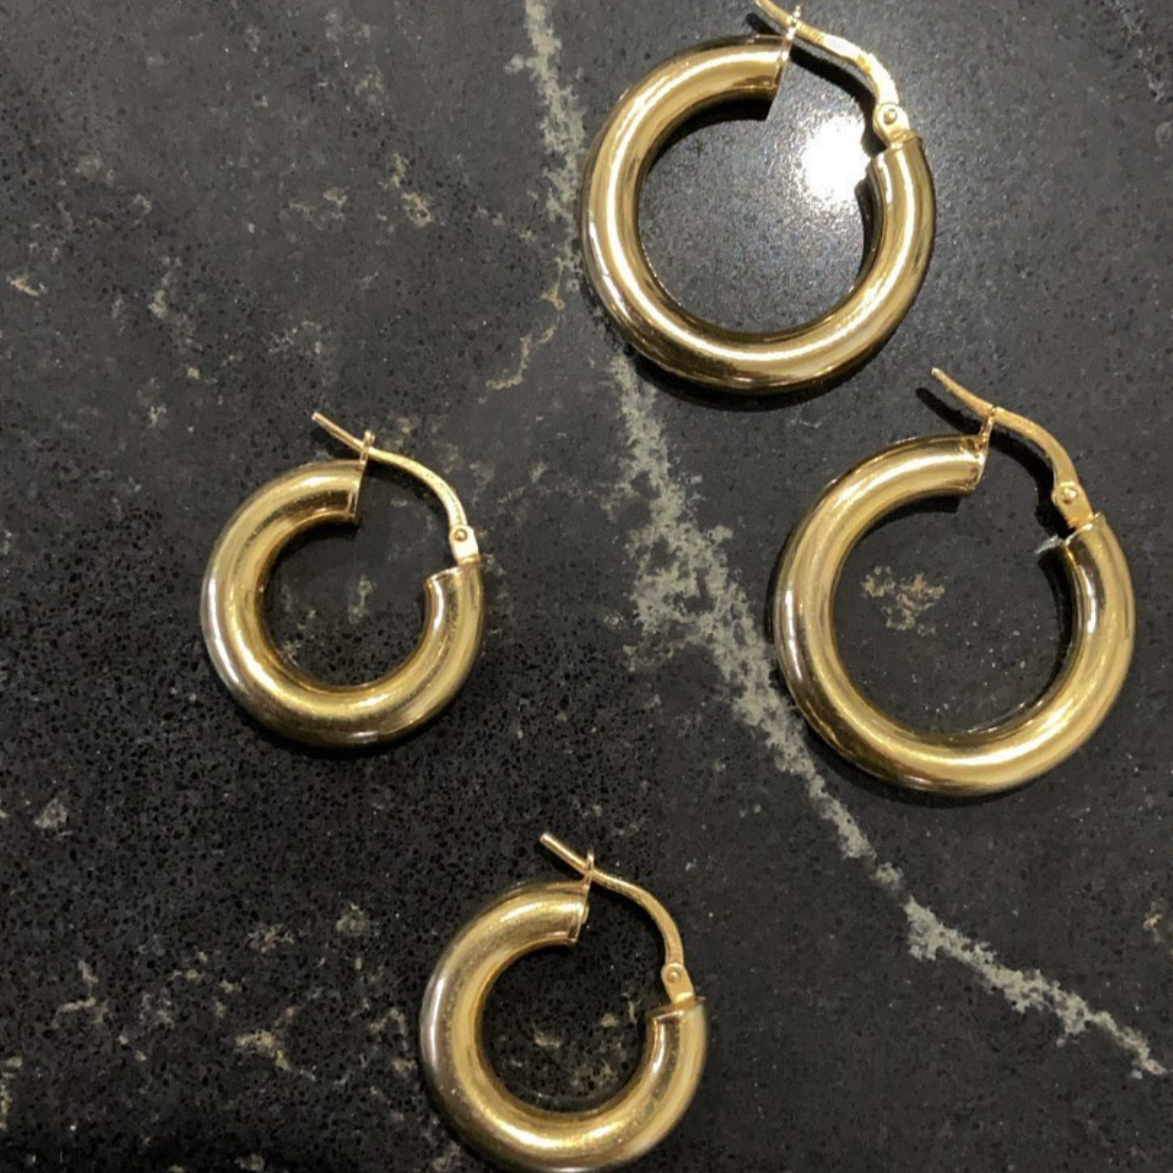 Capitol Hoops by George Rings - 18k yellow gold hoops